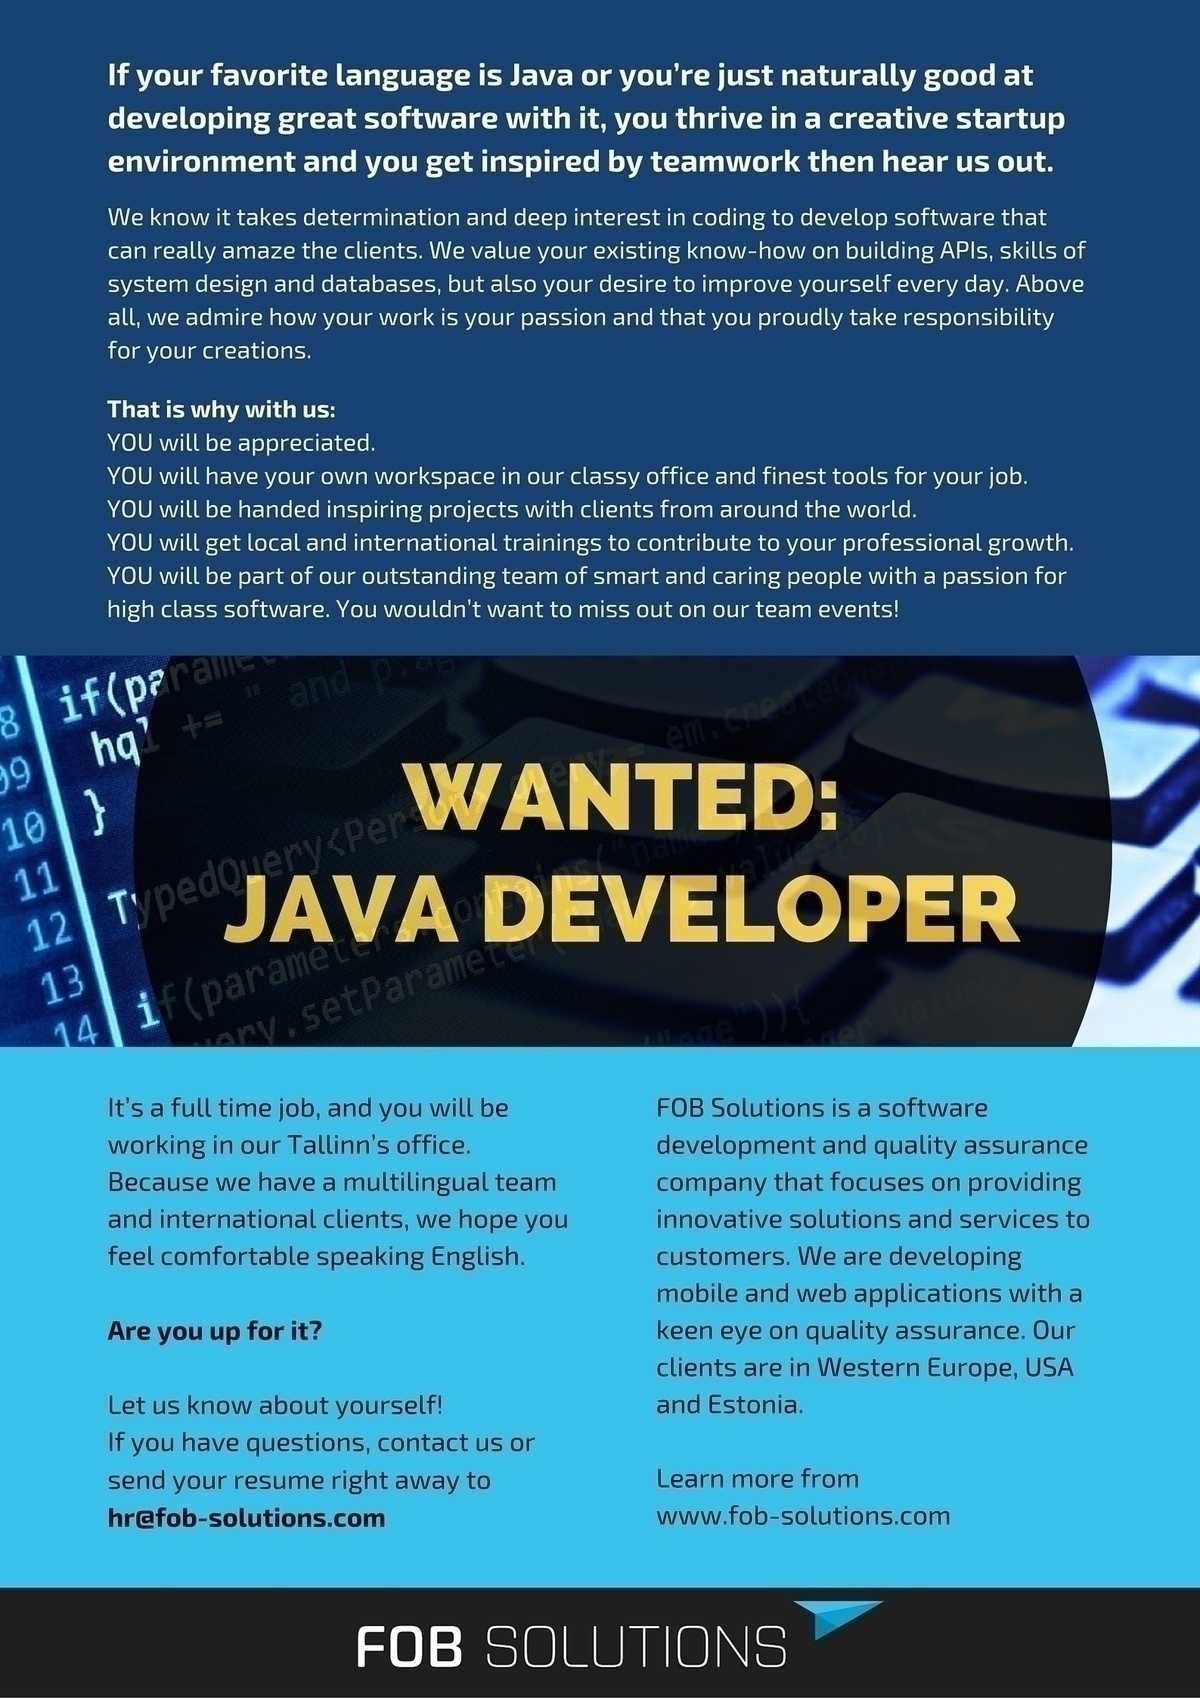 FOB Solutions OÜ Wanted: JAVA DEVELOPER